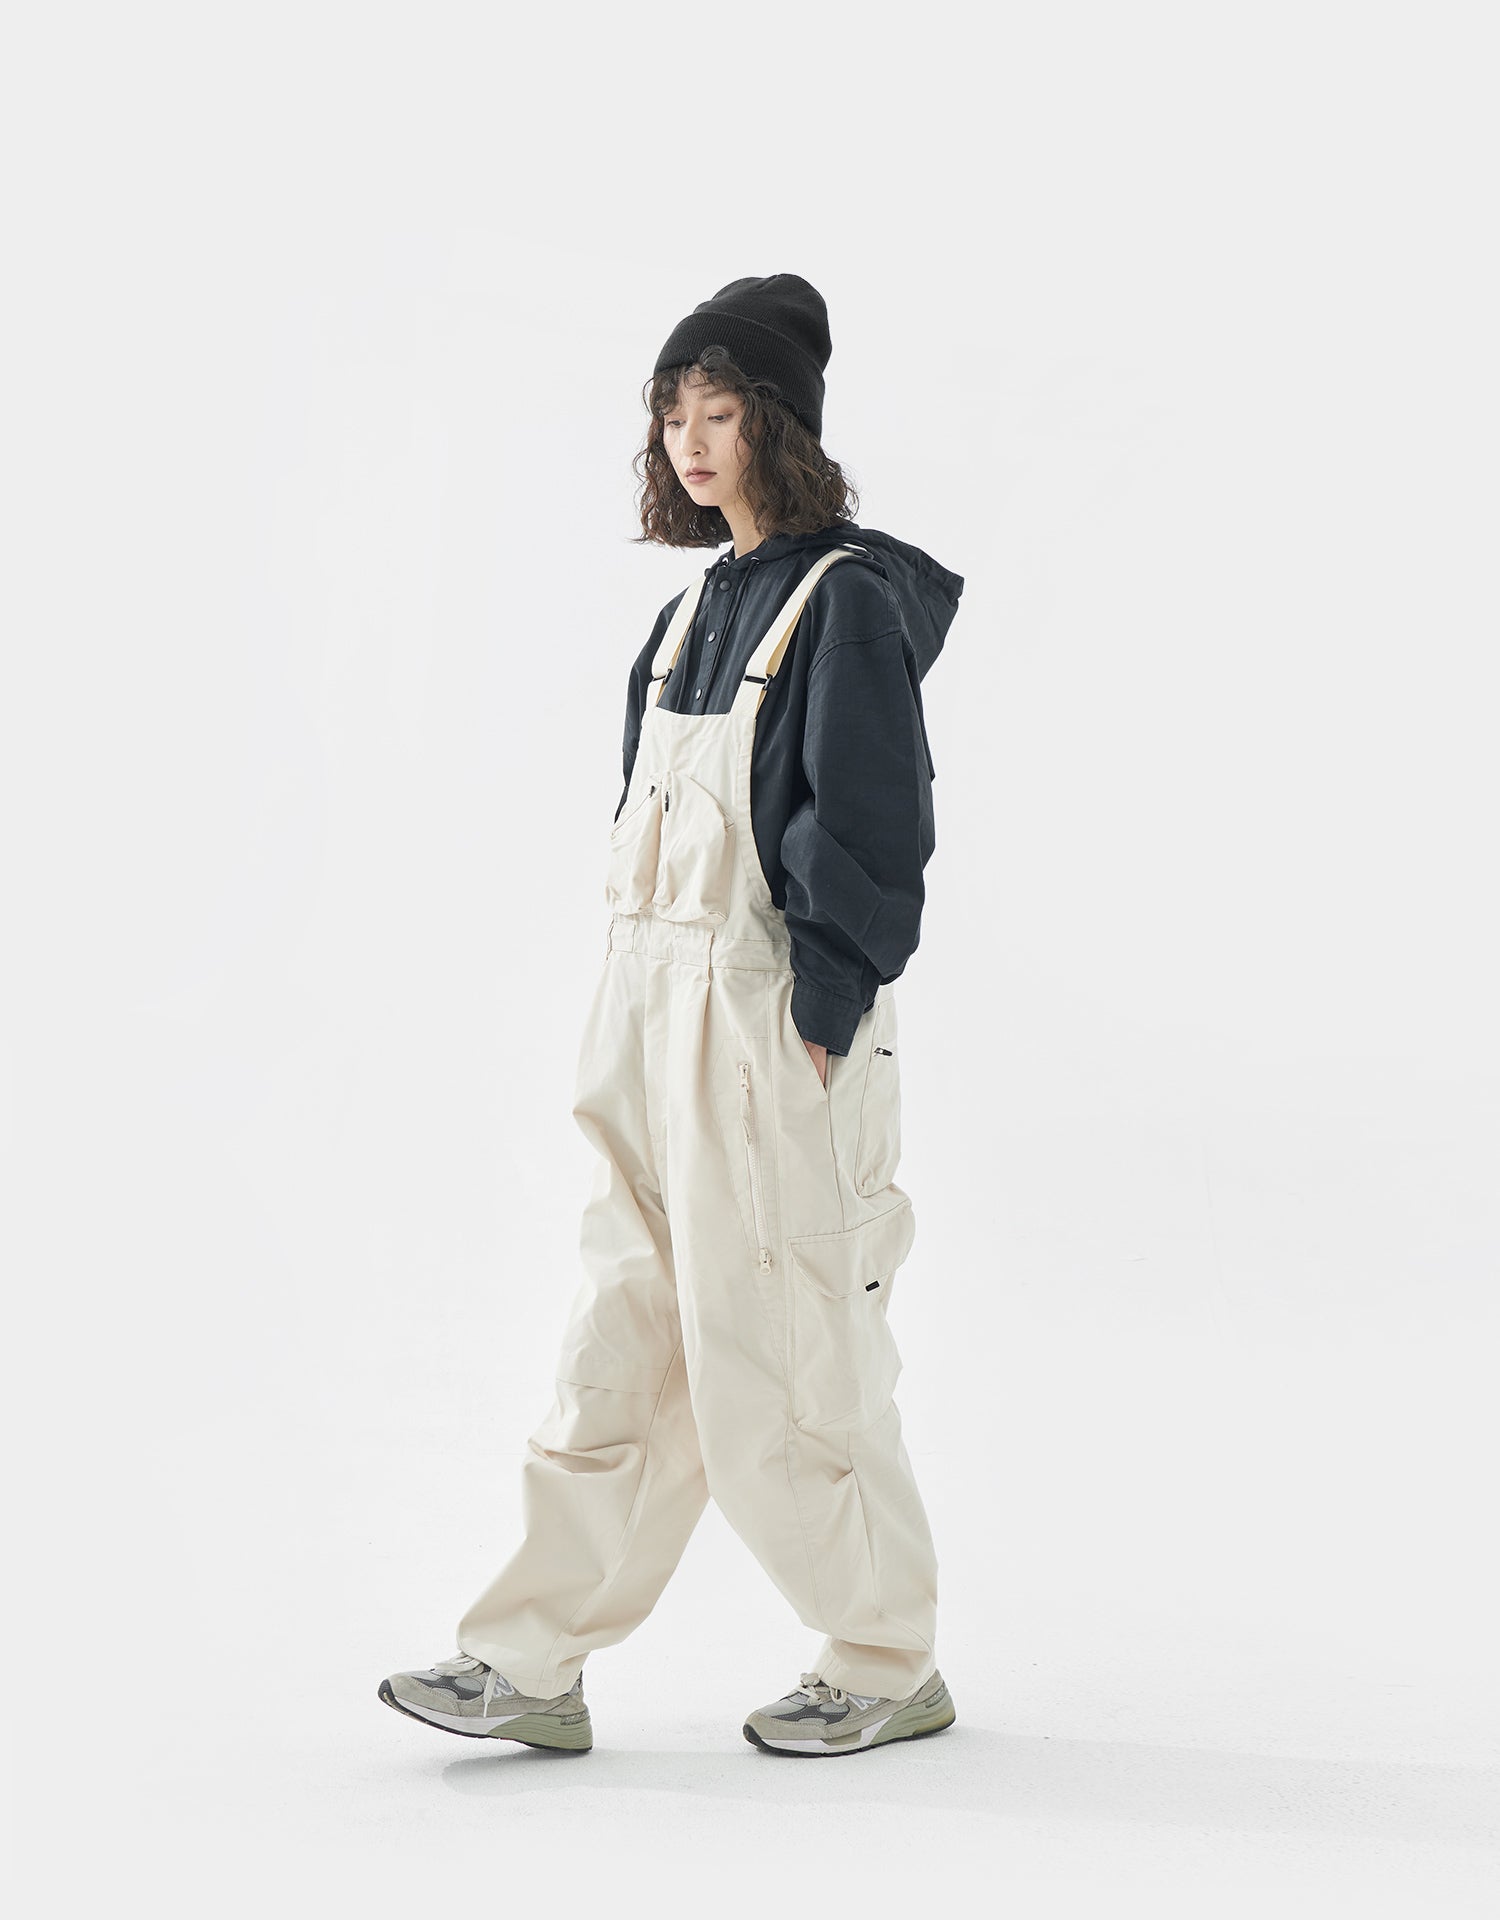 TopBasics Eight Pockets Camping Overall